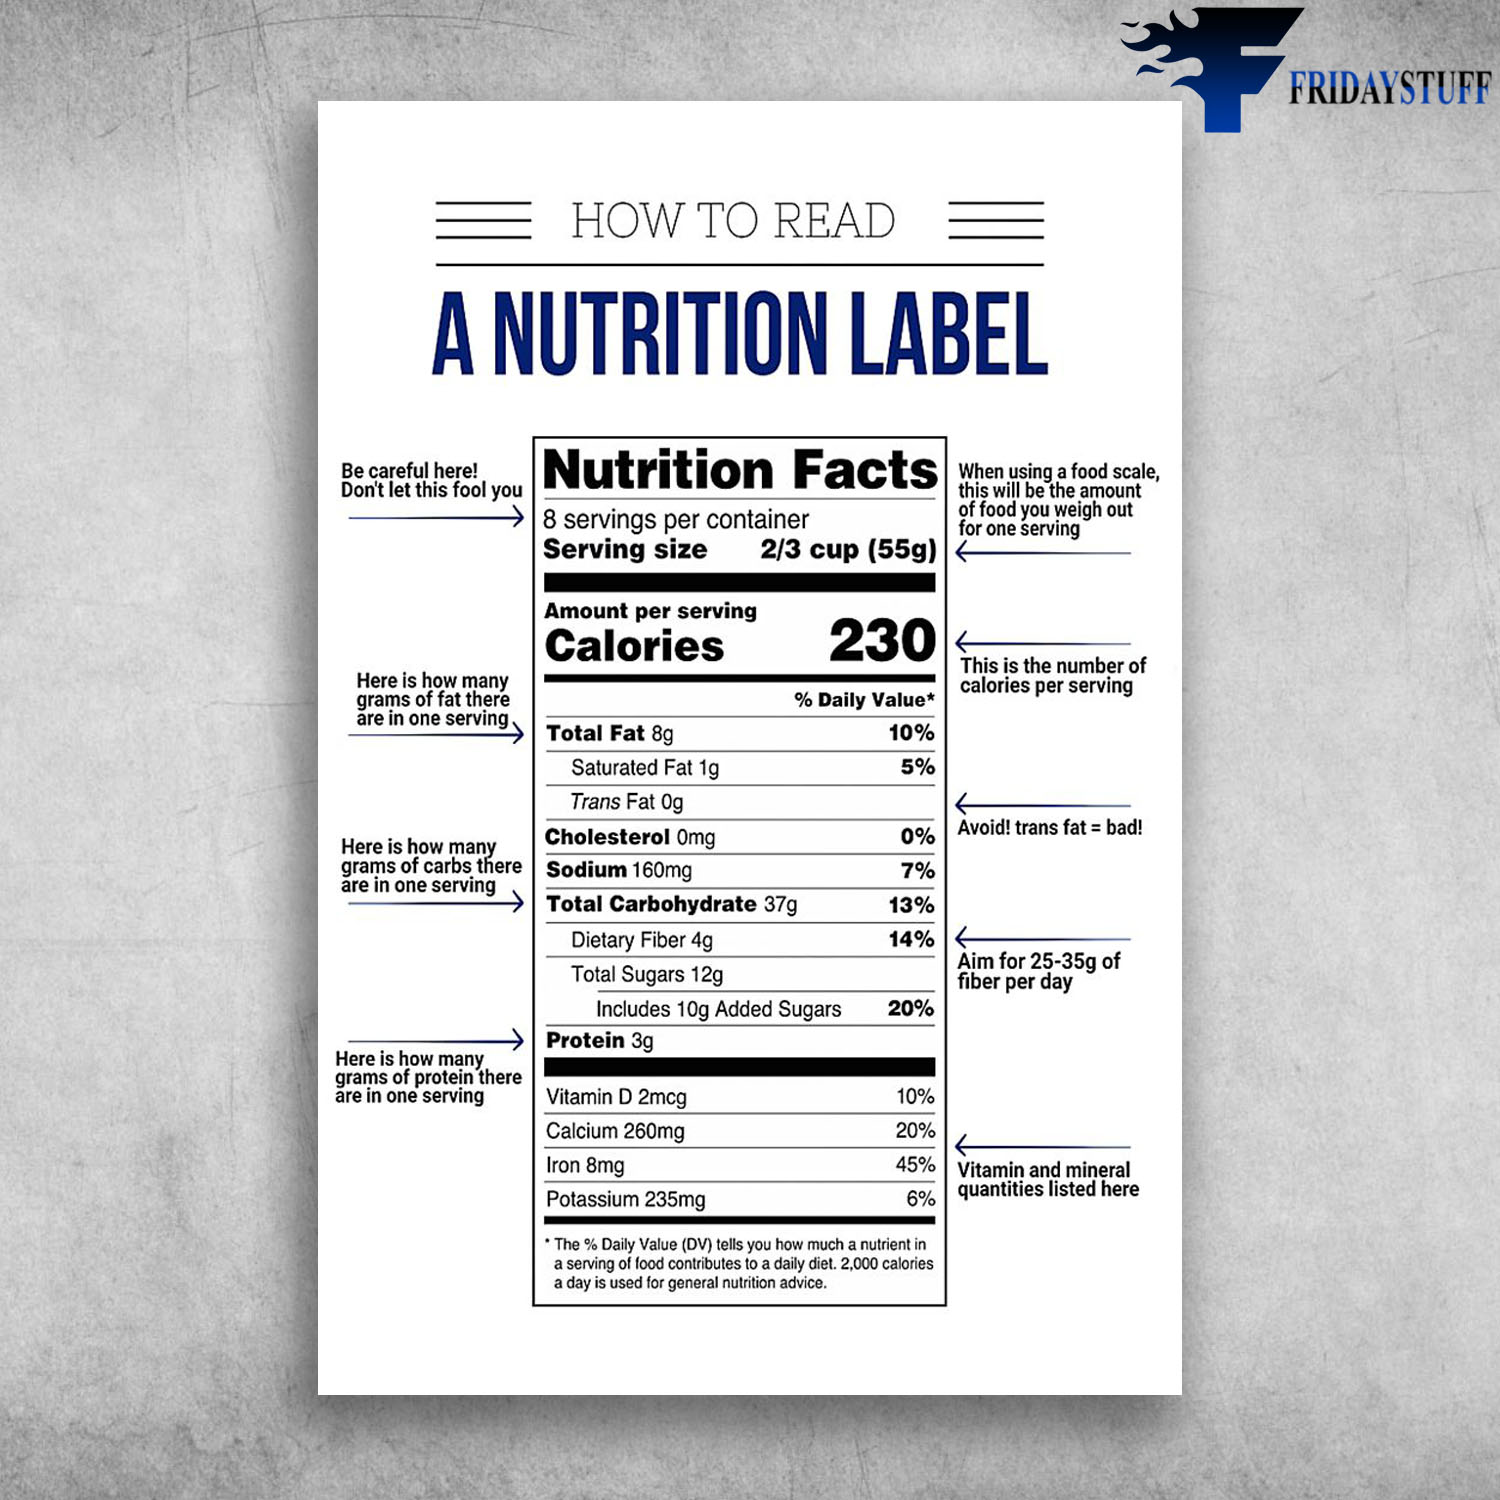 How To Read A Nutrition Label Nutrition Facts Be Careful Here Don't Let This Fool You